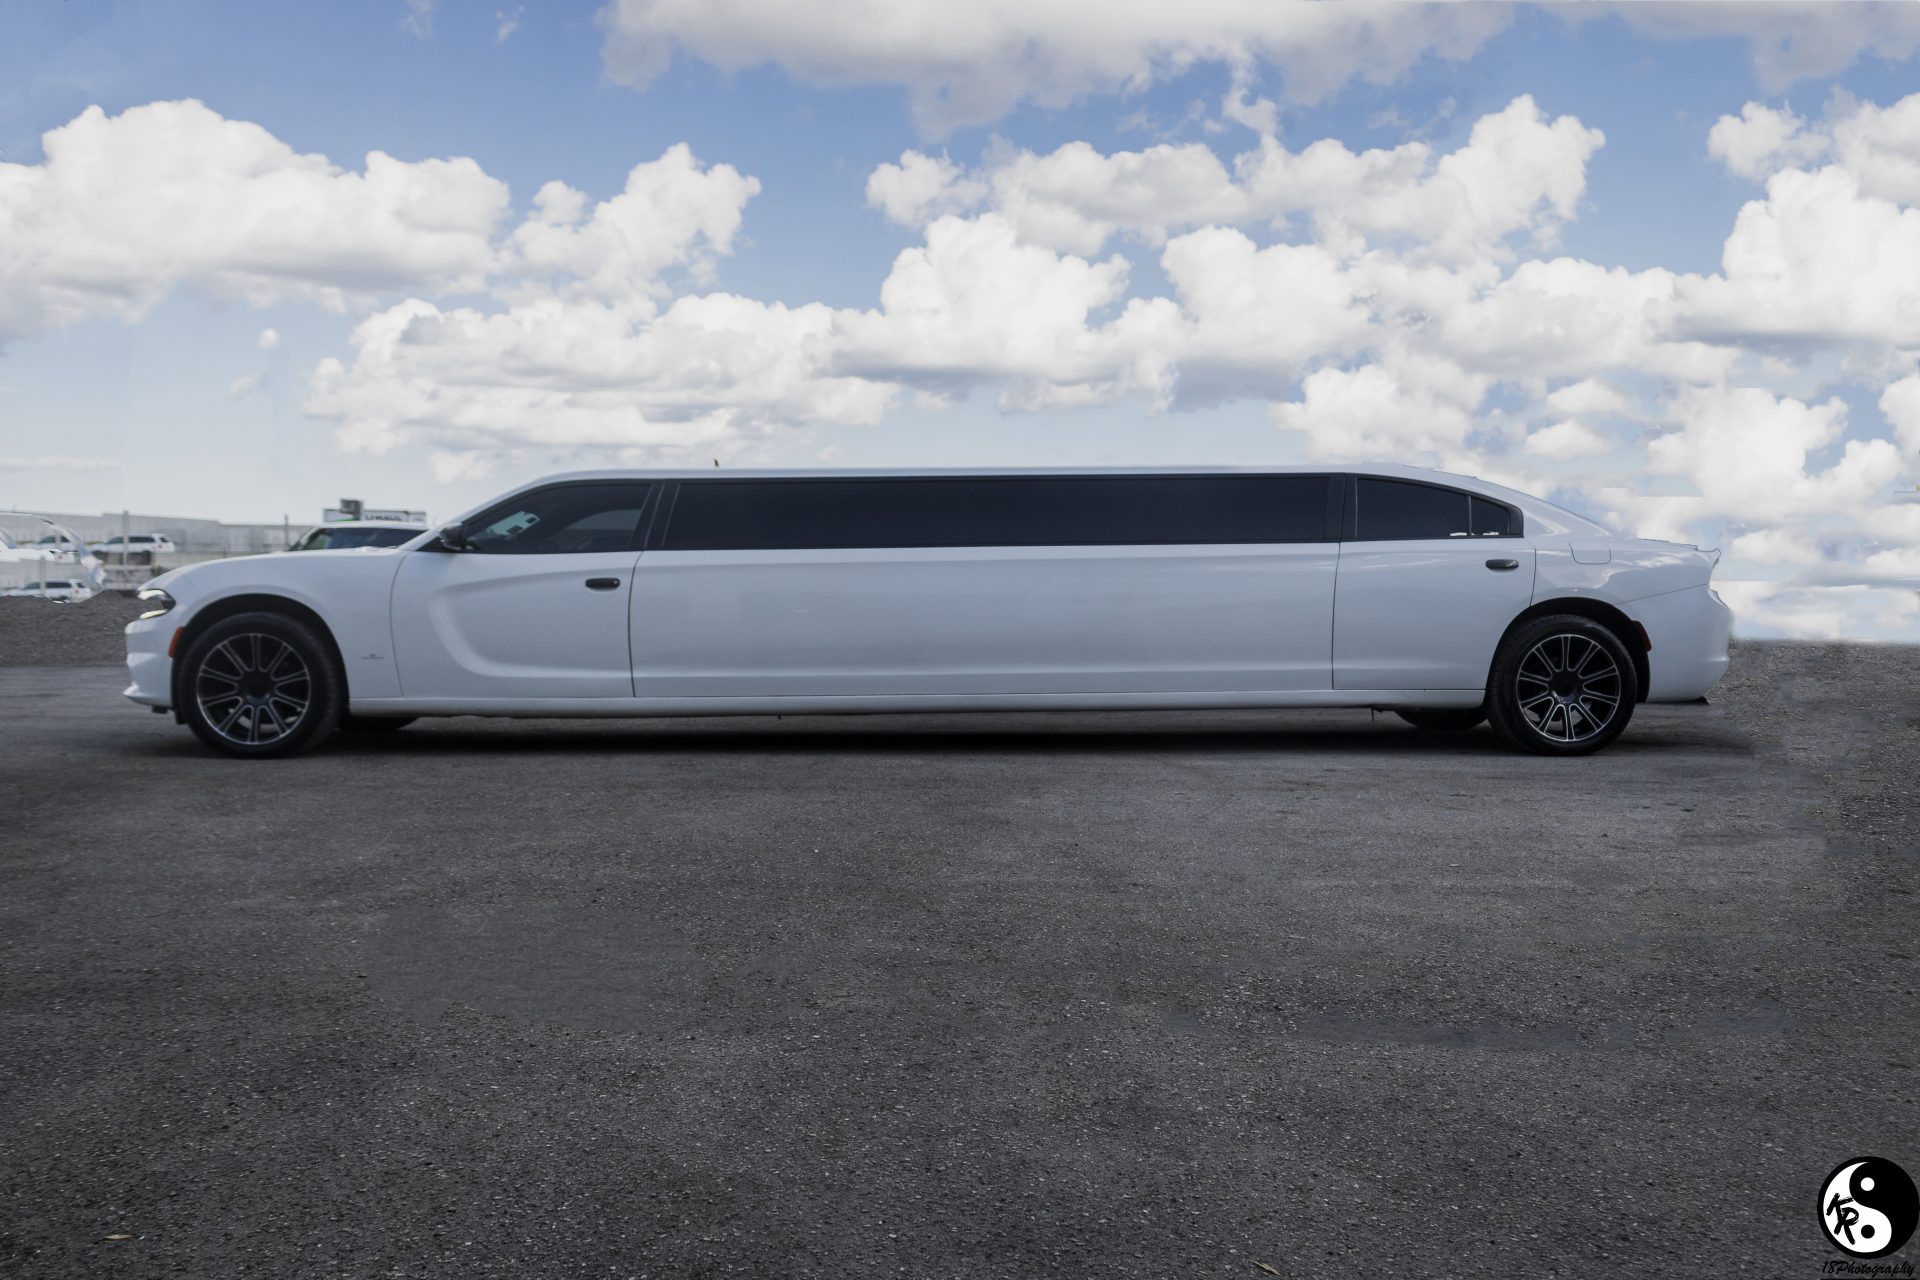 NEW 2016 Dodge Charger White Cat
Limo /
Fort Pierce, FL

 / Hourly $0.00
